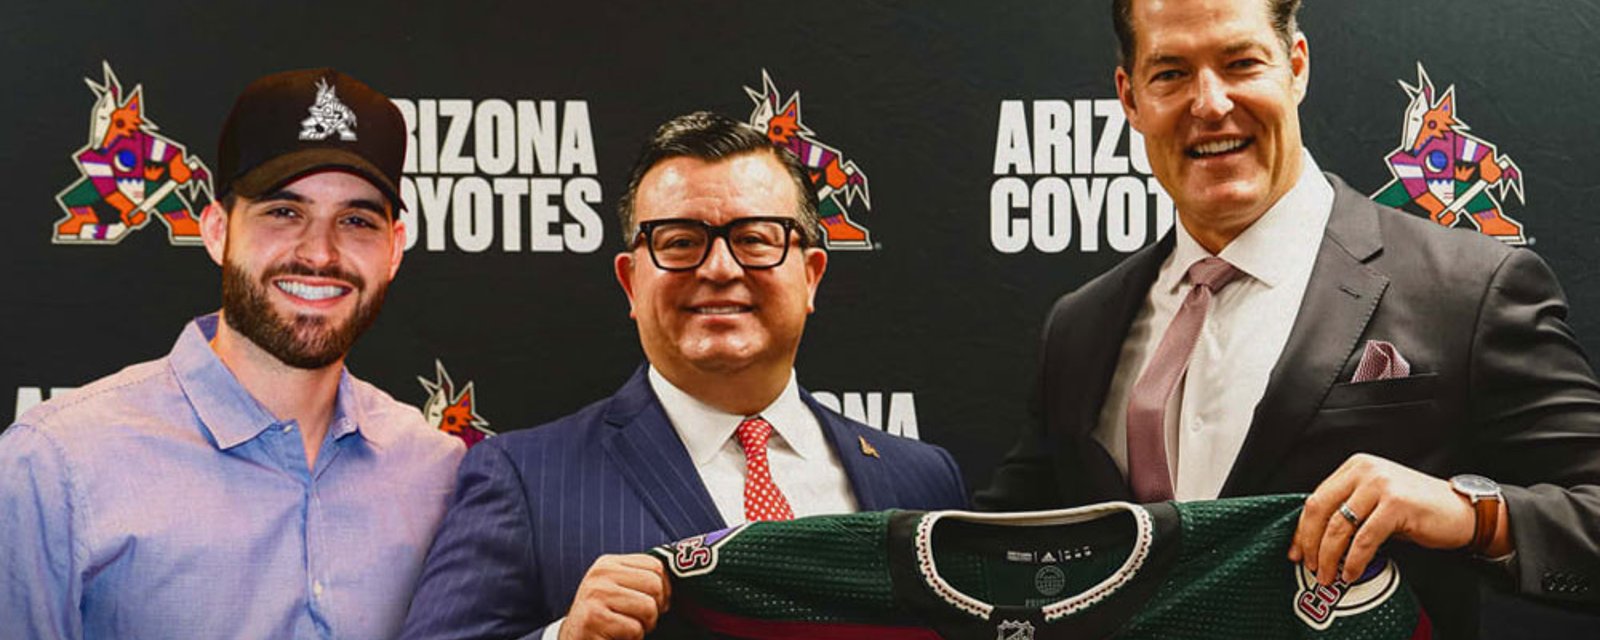 Coyotes owner finally gives up on his team